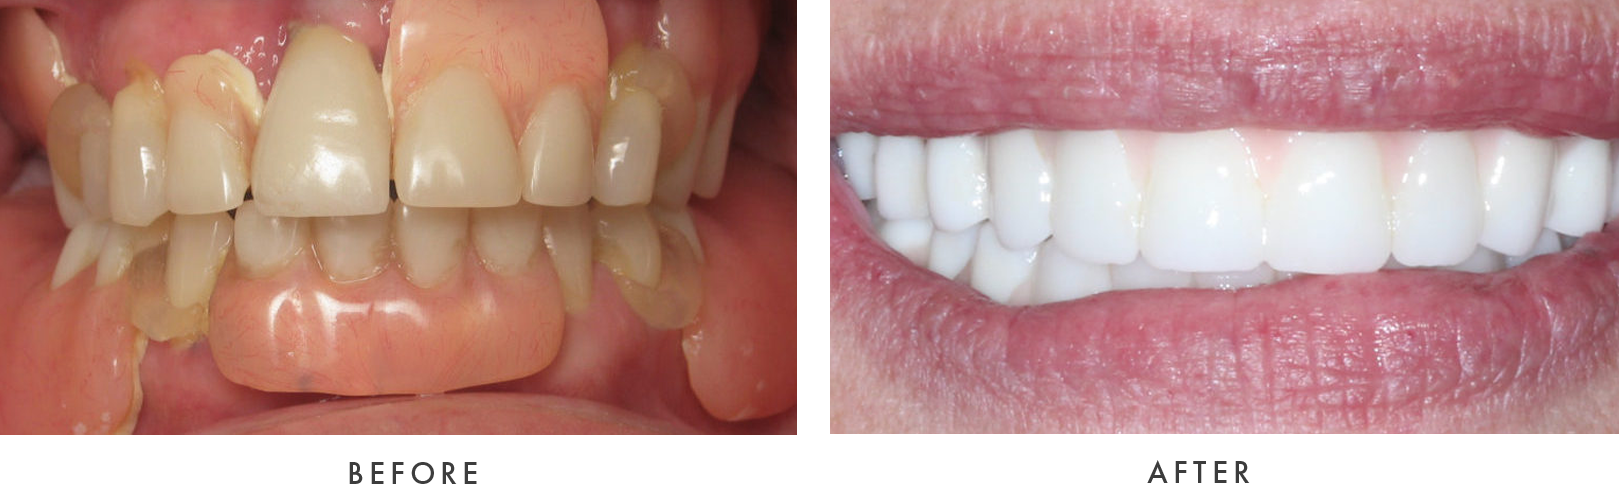 before and after Dental Implant Treatmemnt